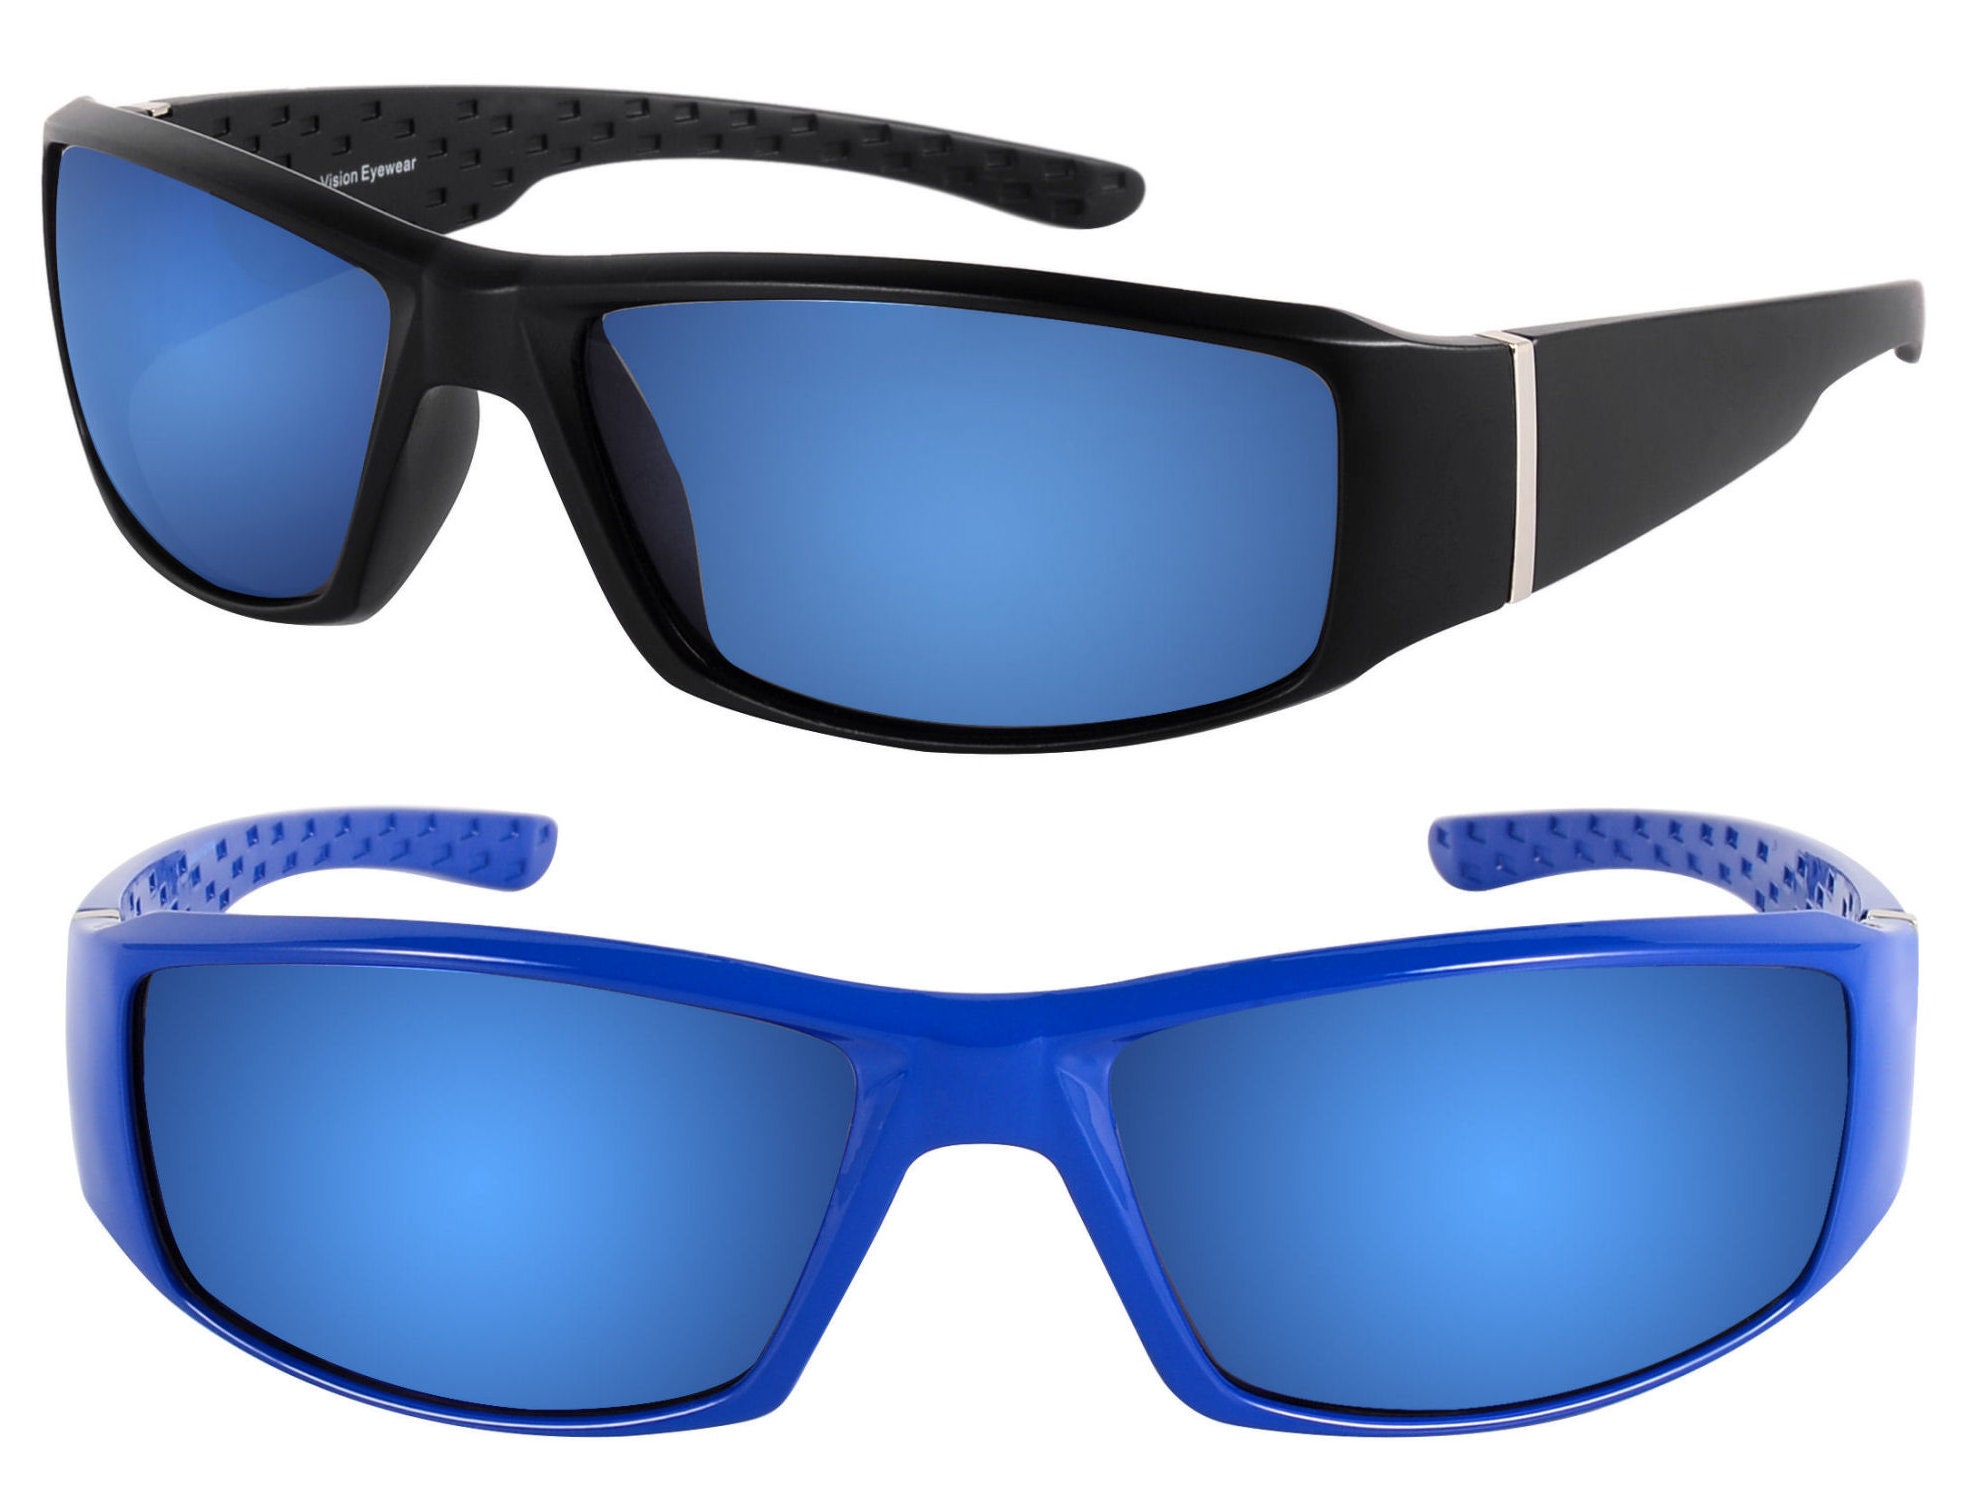 2 Pair of The Diesel Lightweight Extra Large Polarized Sunglasses for Men with Wide Heads